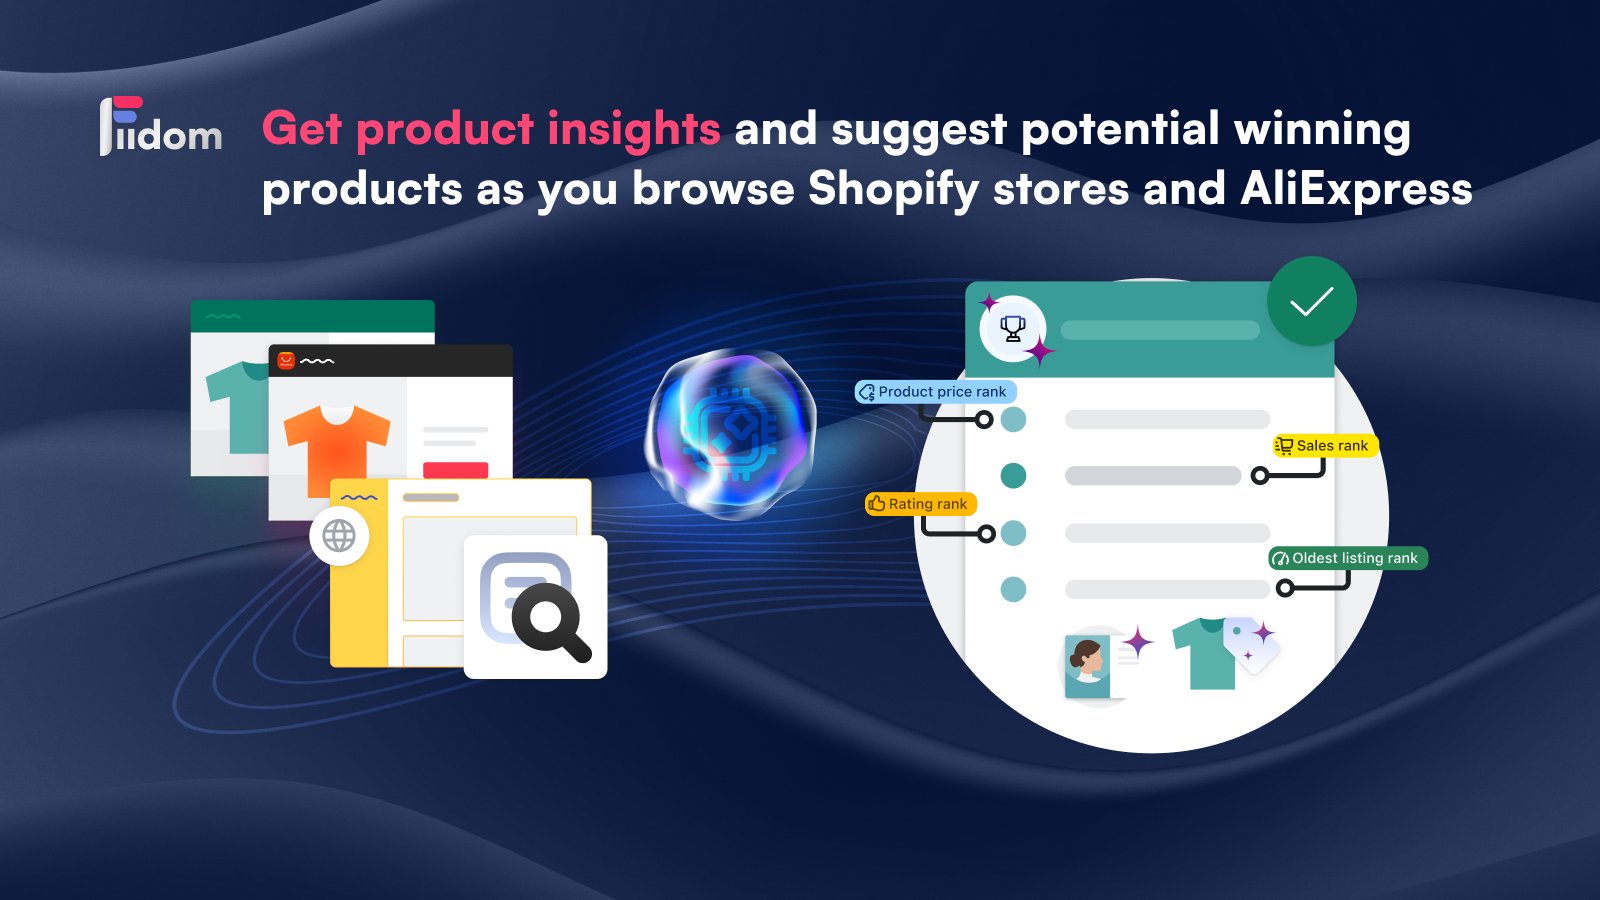 Get product insights, potential winning products from AliExpress